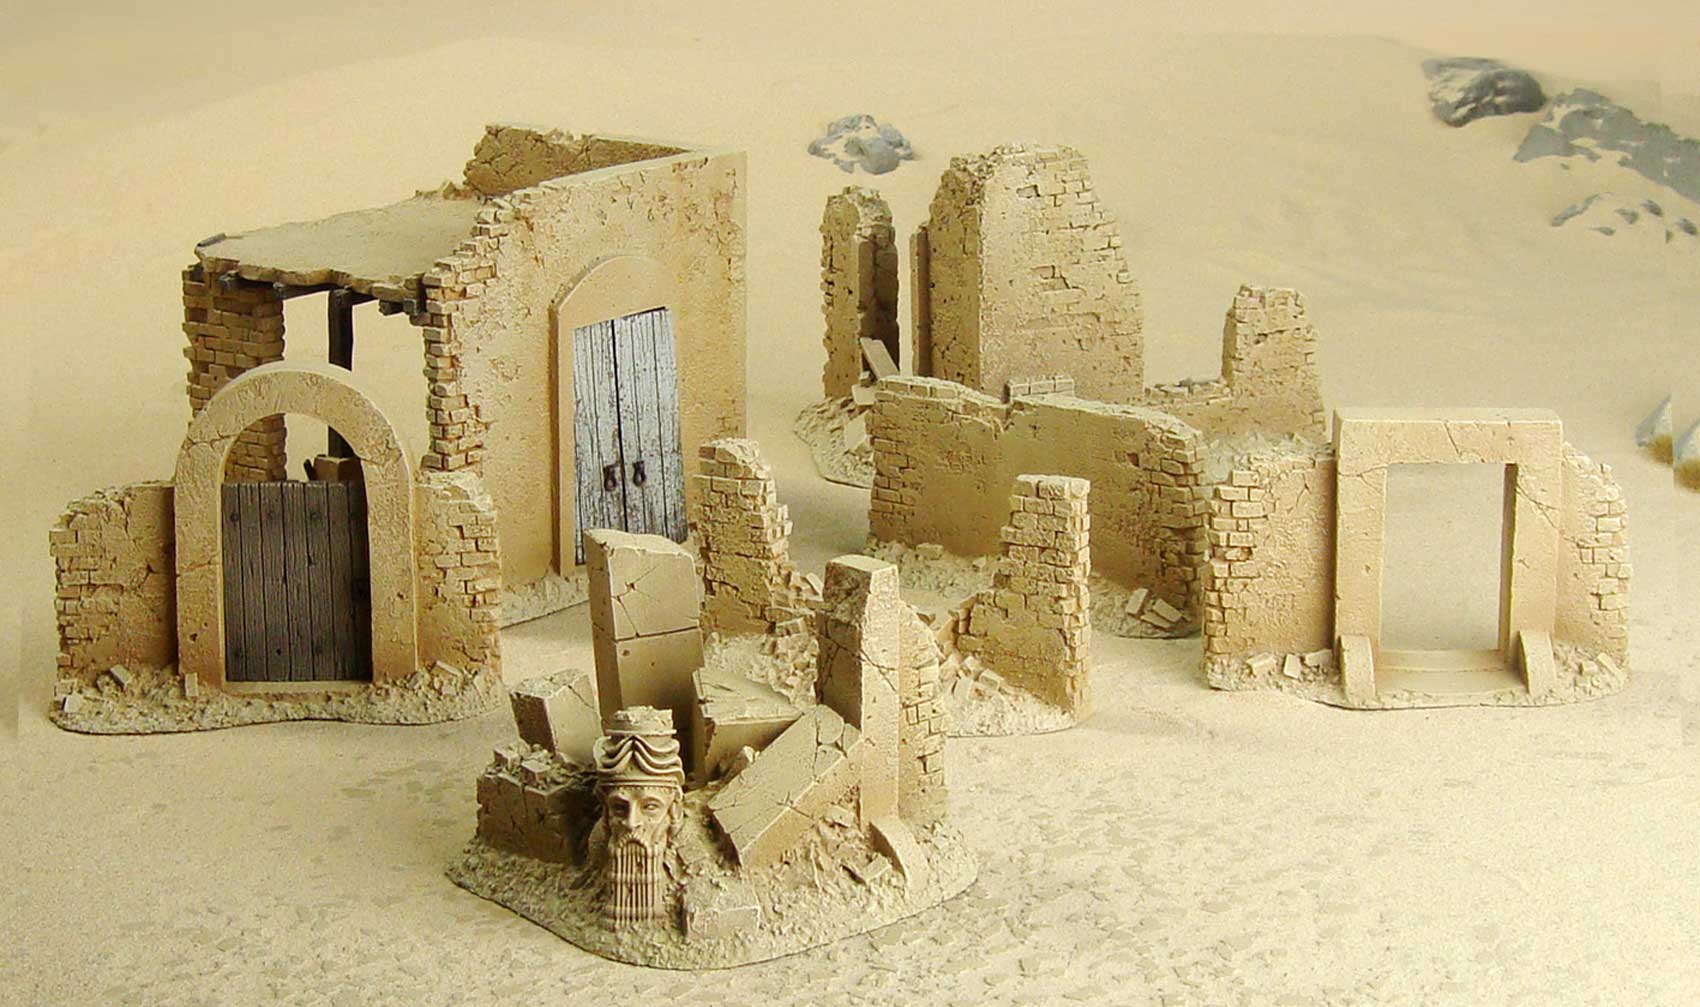 DUST 1947 New Release – BABYLON MIDDLE EASTERN ABANDONED COMPOUND